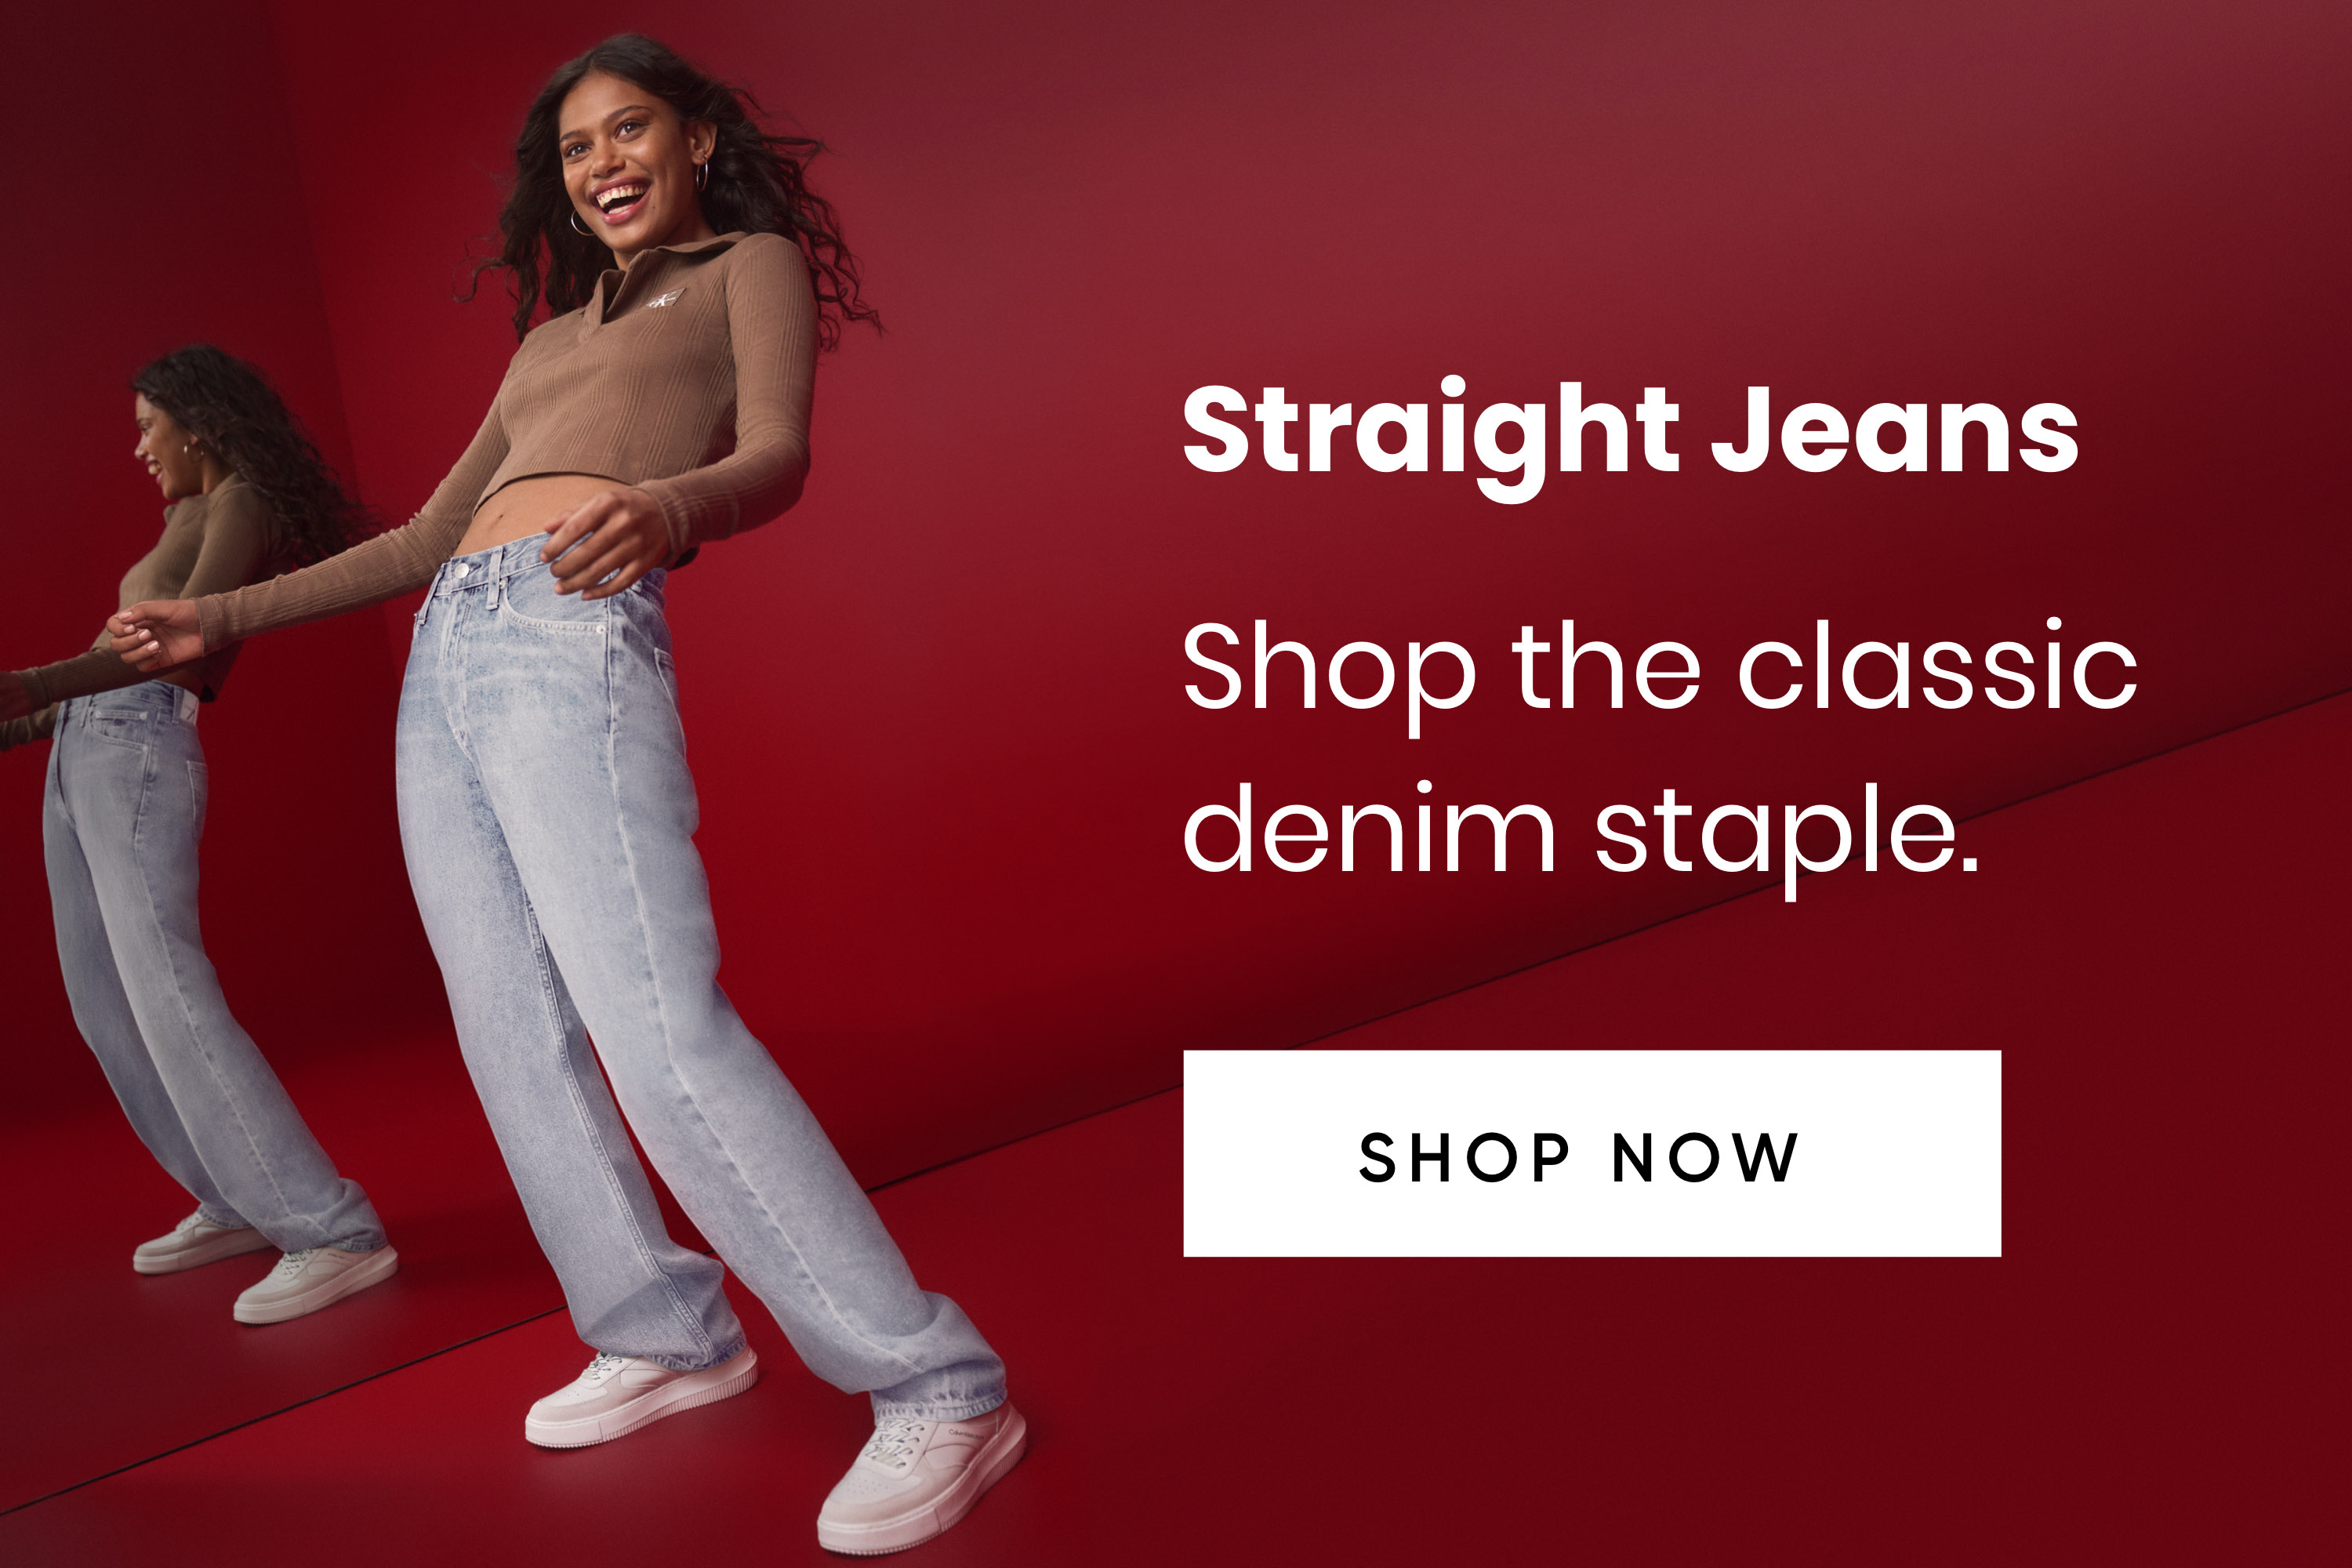 Women's Clothes | Shop Clothing & Fashion Online | Afterpay | MYER